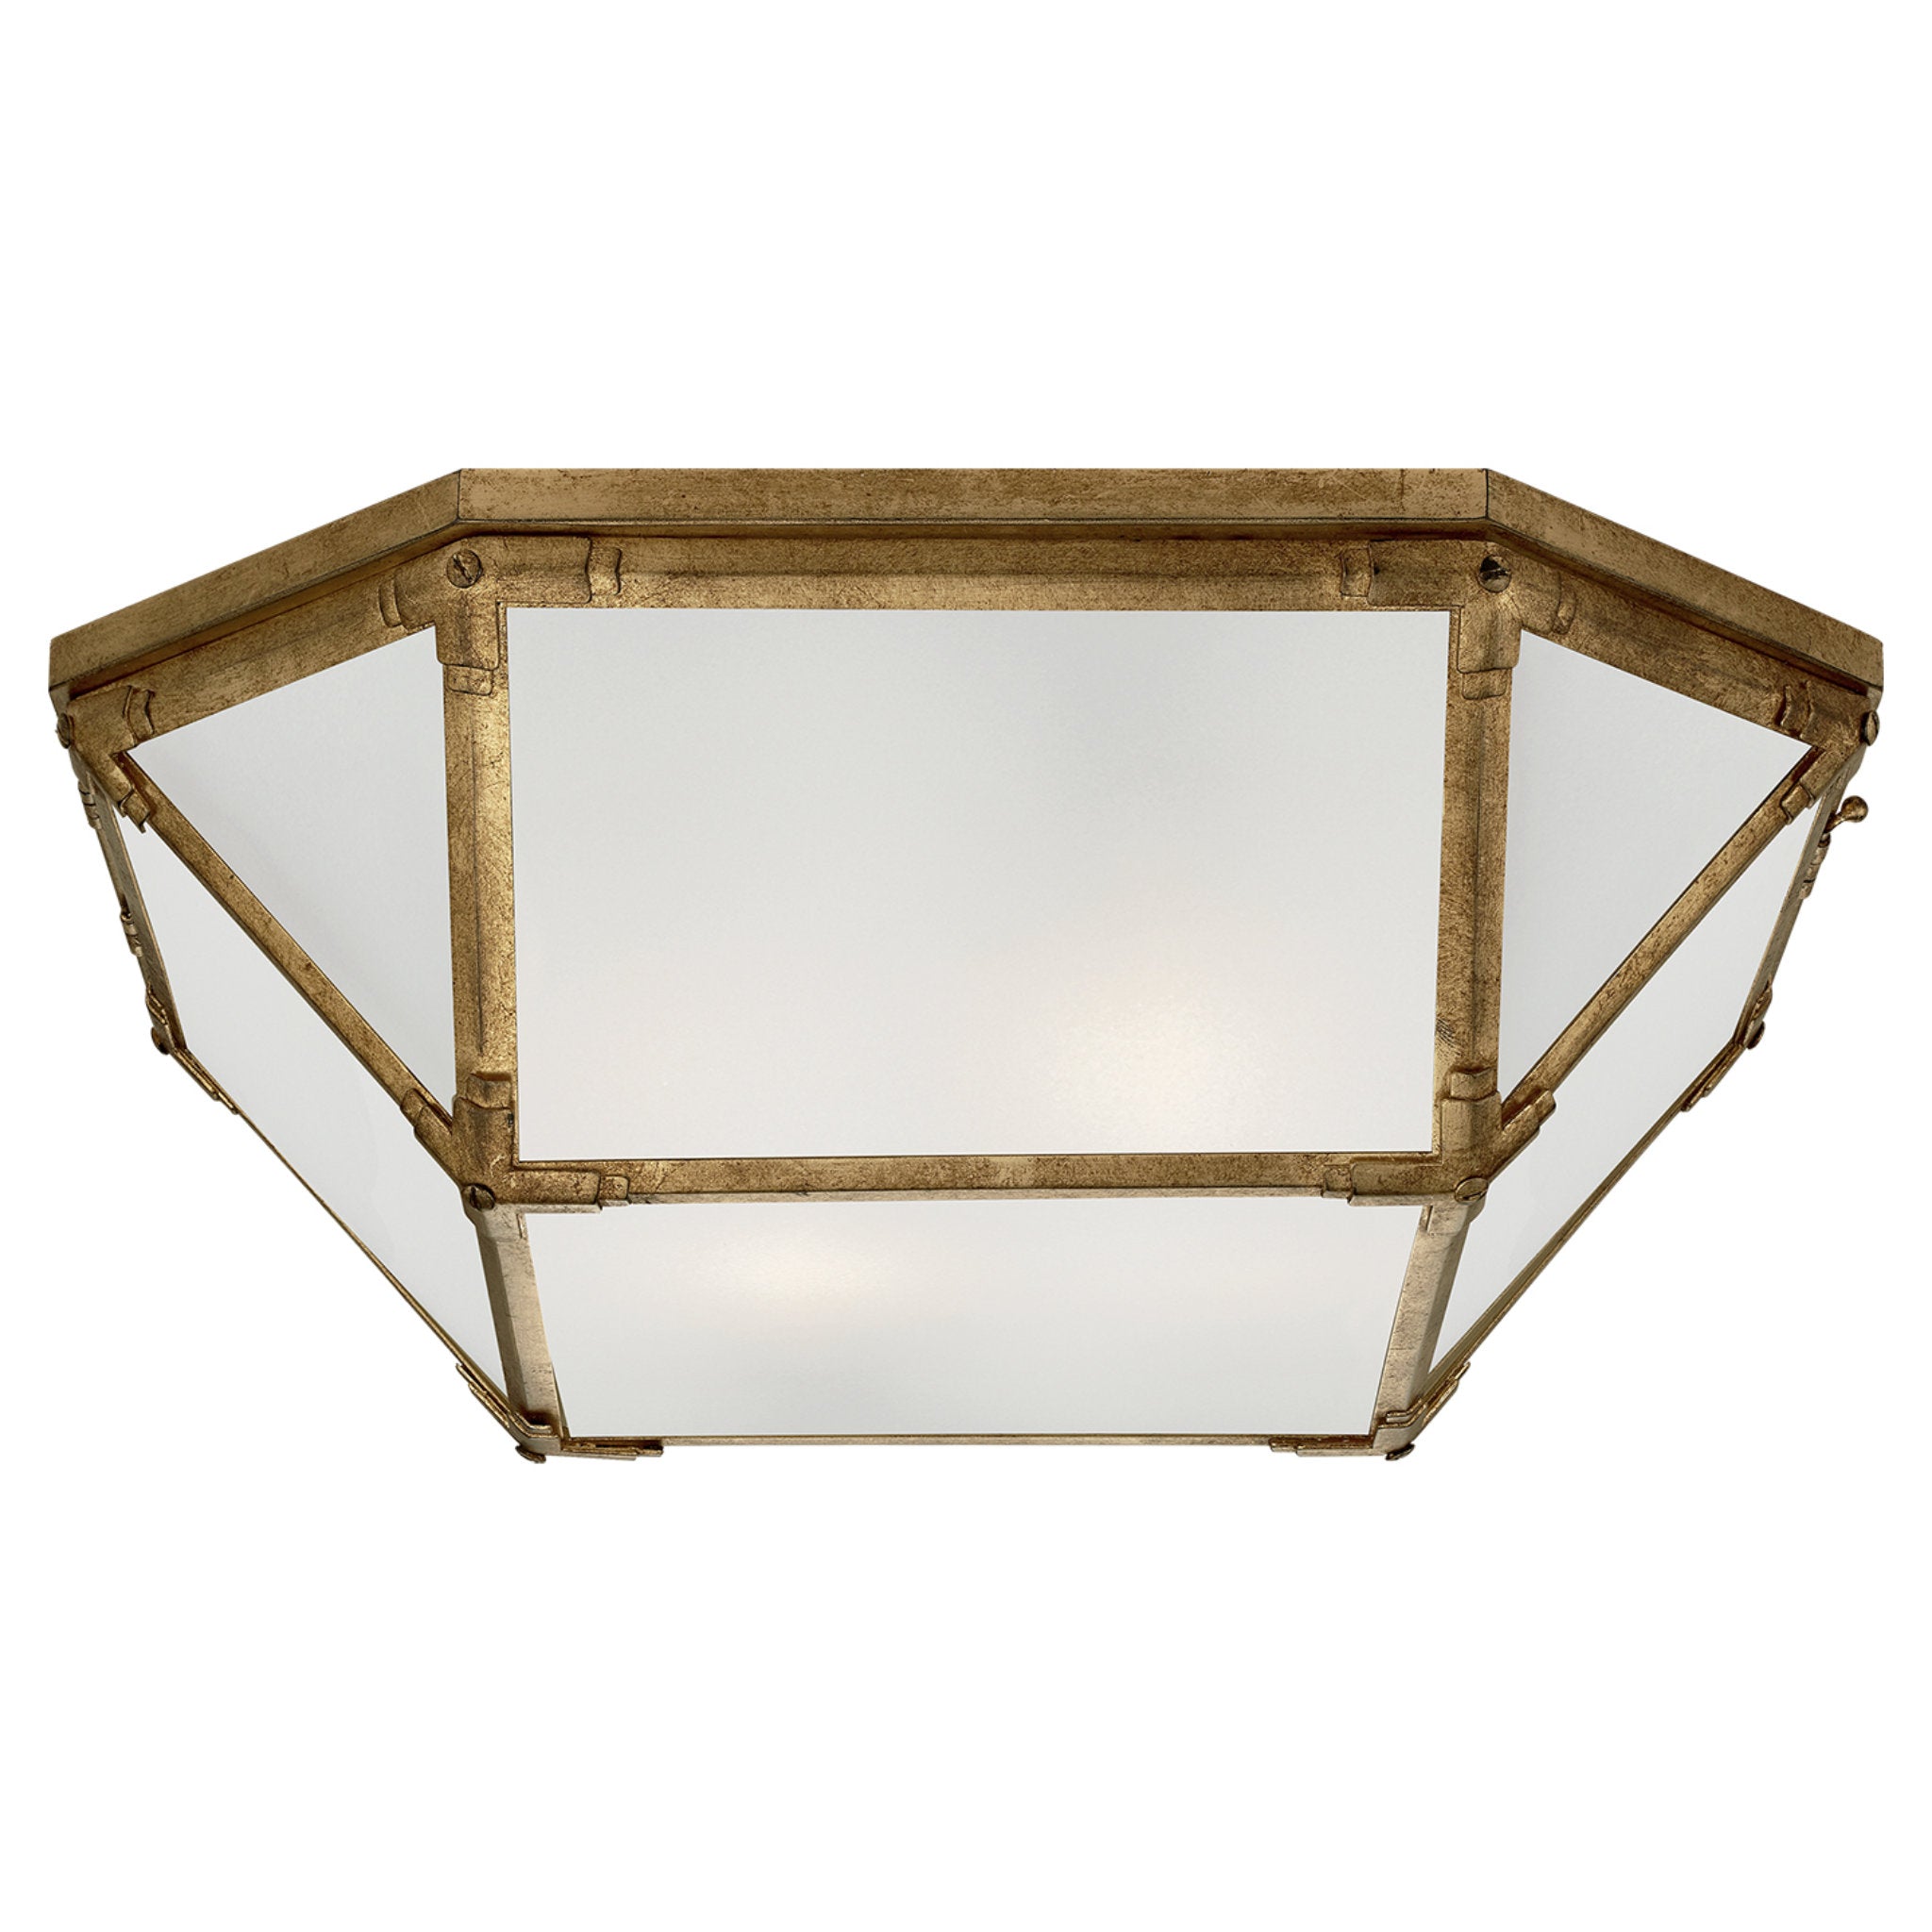 Suzanne Kasler Morris Large Flush Mount in Gilded Iron with Frosted Glass